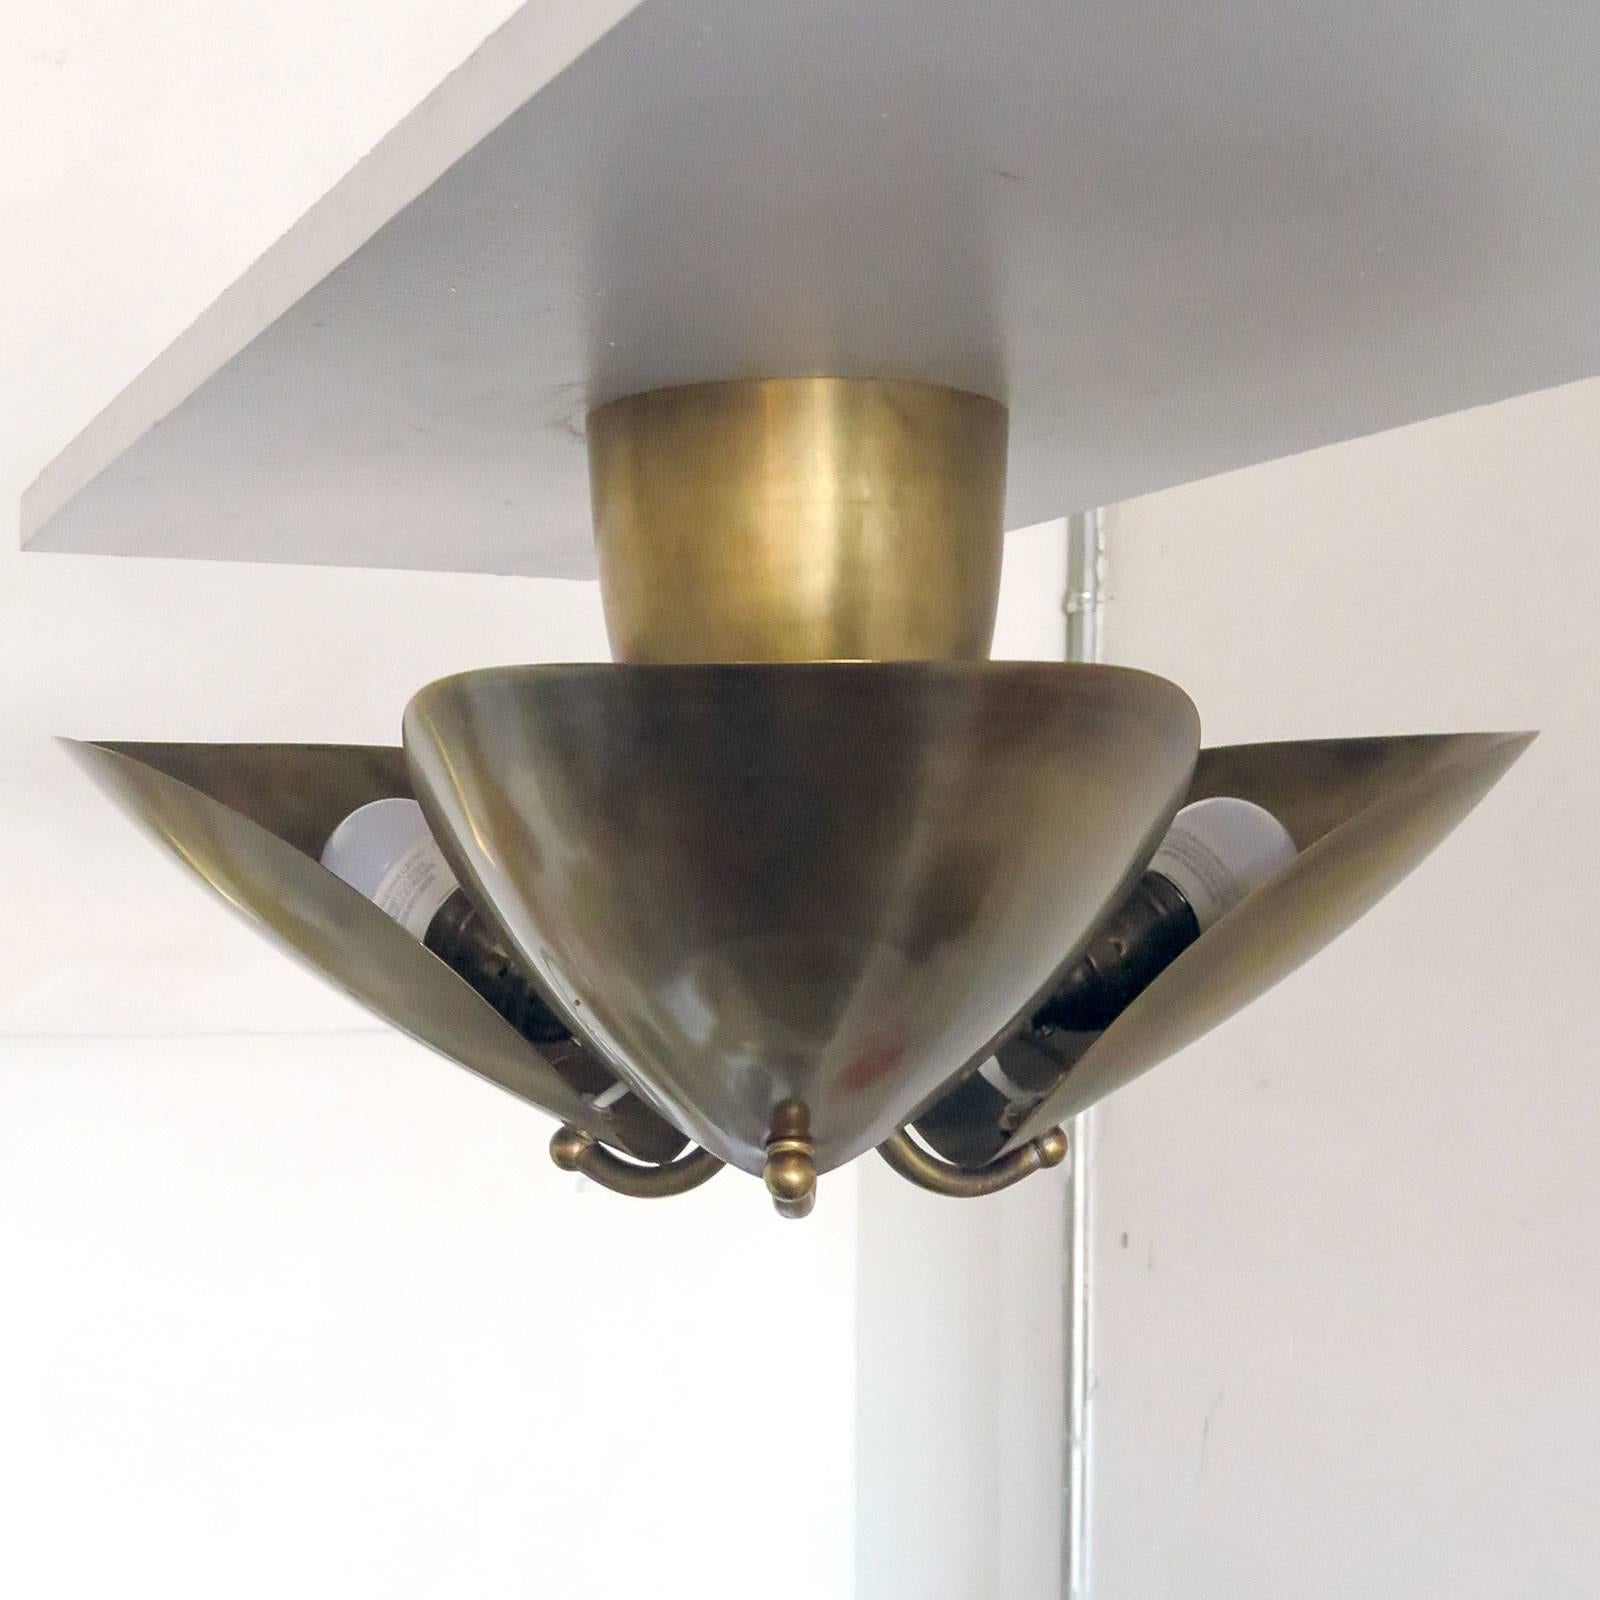 Wonderful, organic three-petal patinaed brass flush mount by Gallery L7. Three E26 sockets per fixture, max. wattage 40w each, UL listing available upon request for an additional charge. Multiples available.